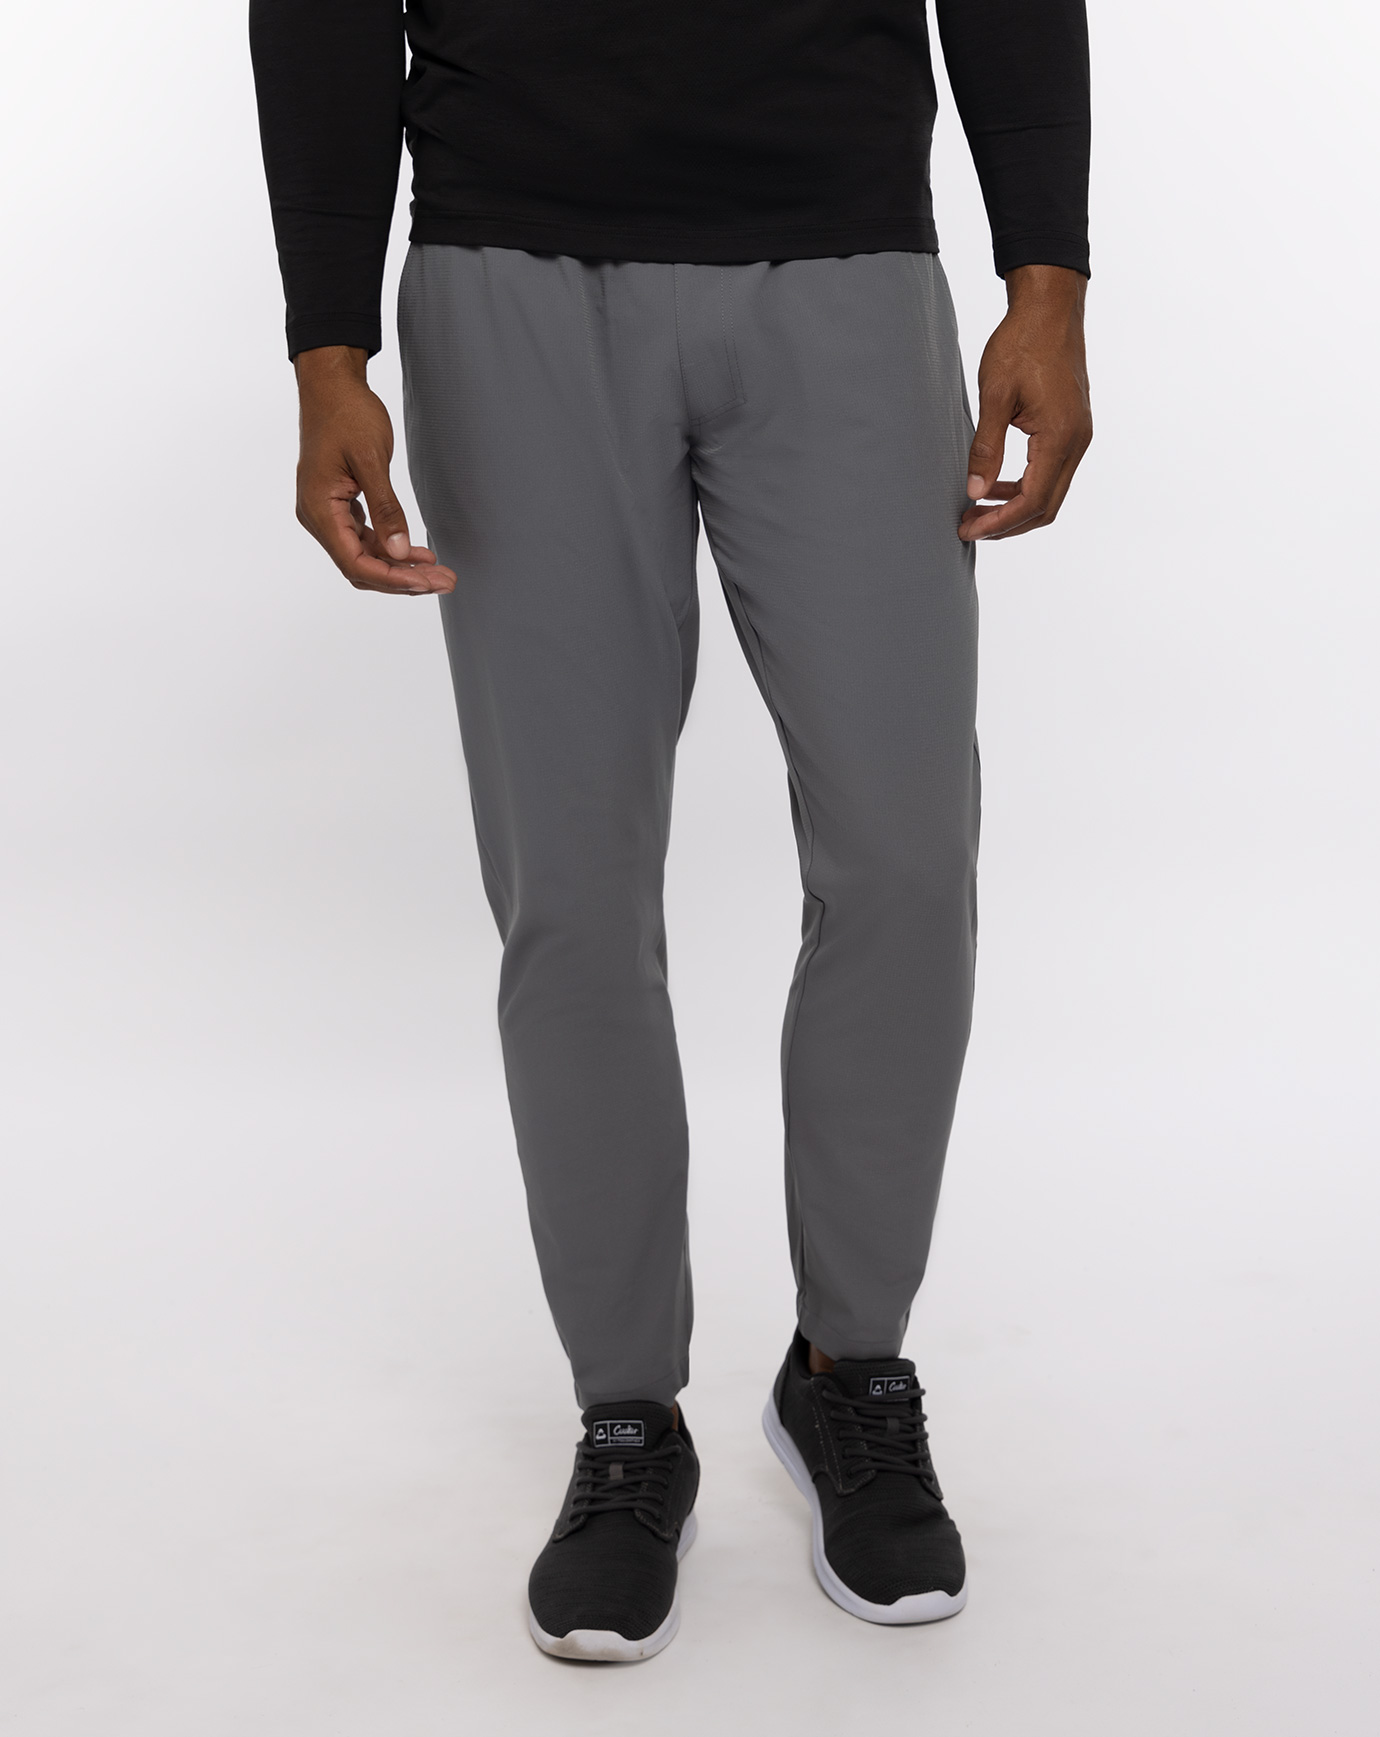 TRAVEL ACTIVE PANT 2.0  1